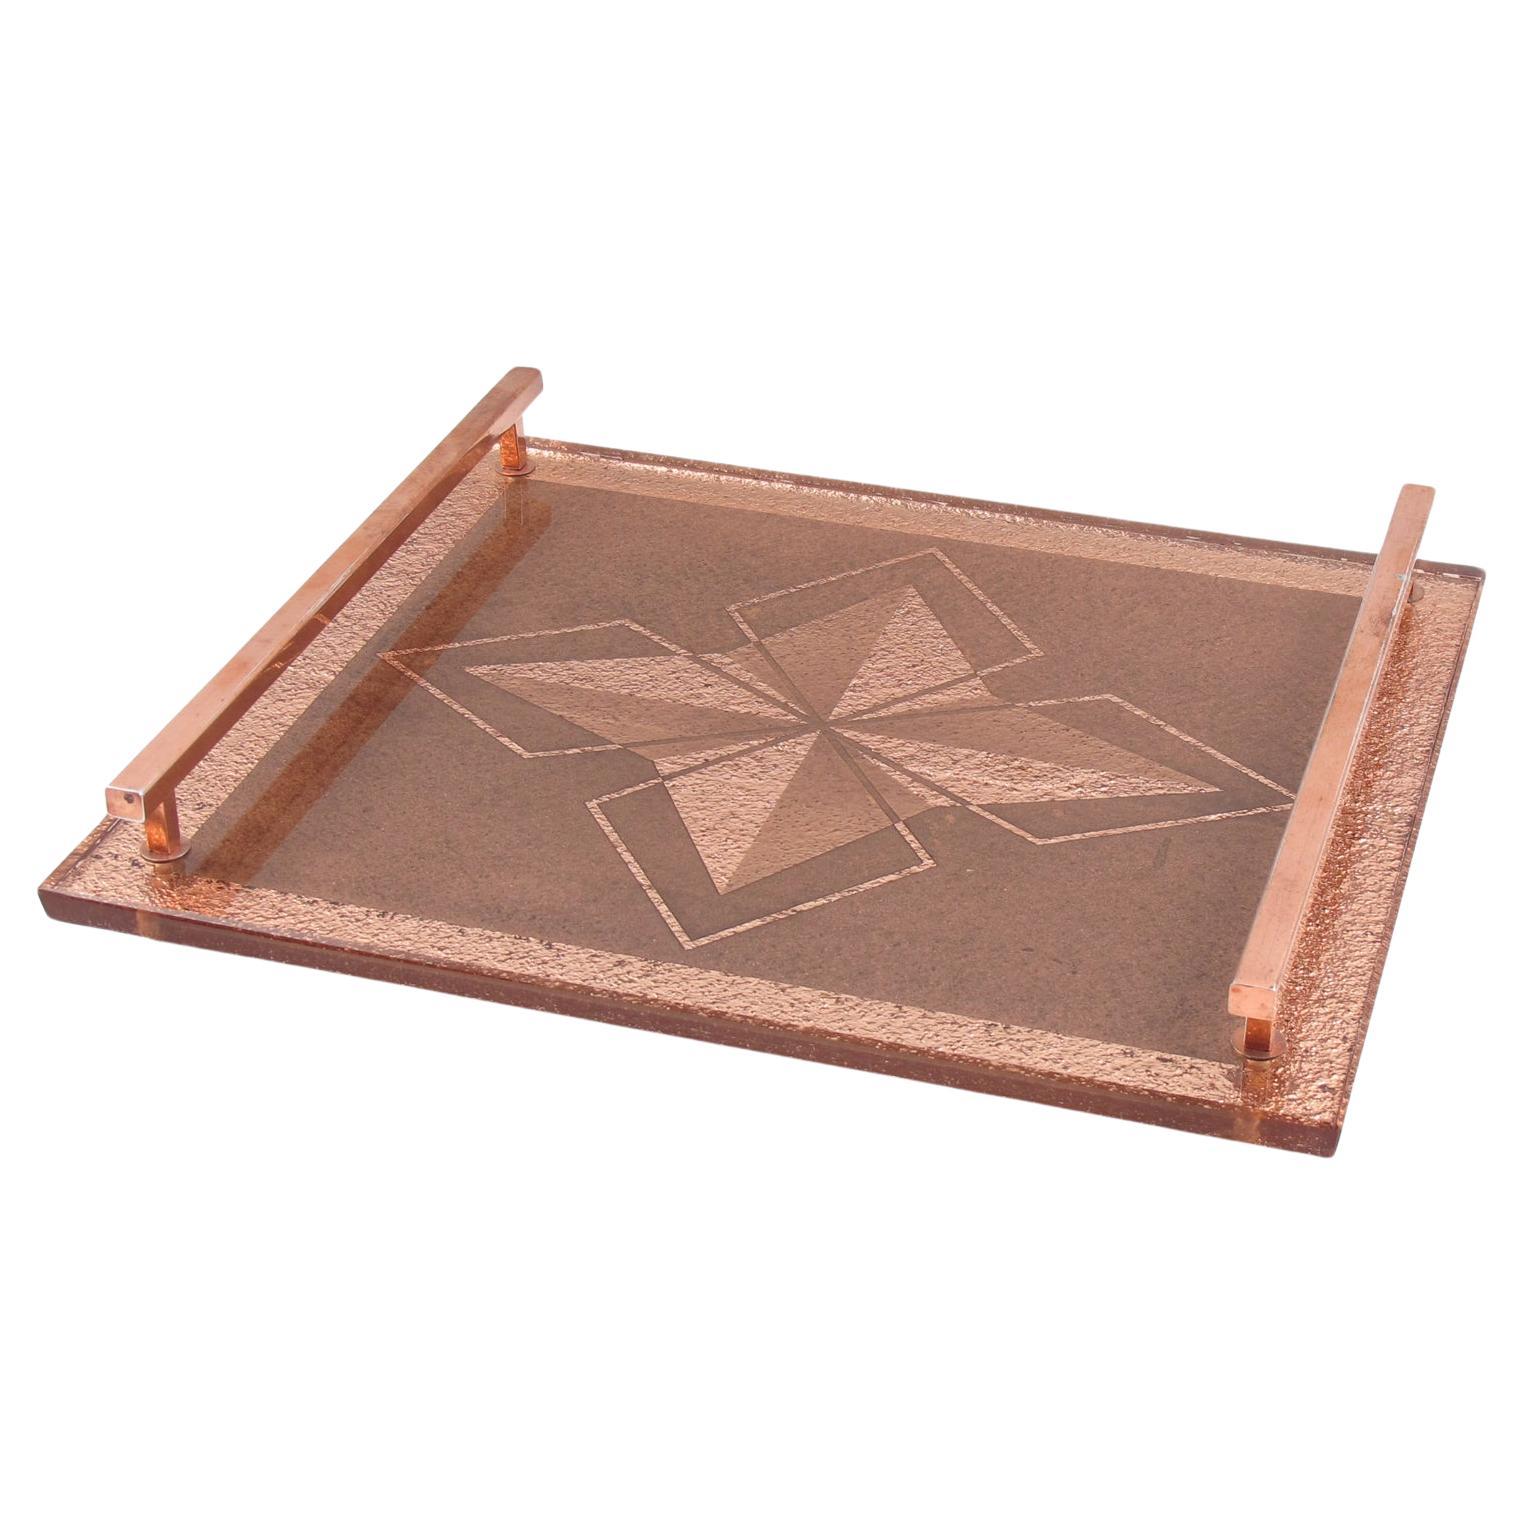 Atelier Pansart Style Art Deco Copper Mirrored Glass Serving Tray, France 1940s For Sale